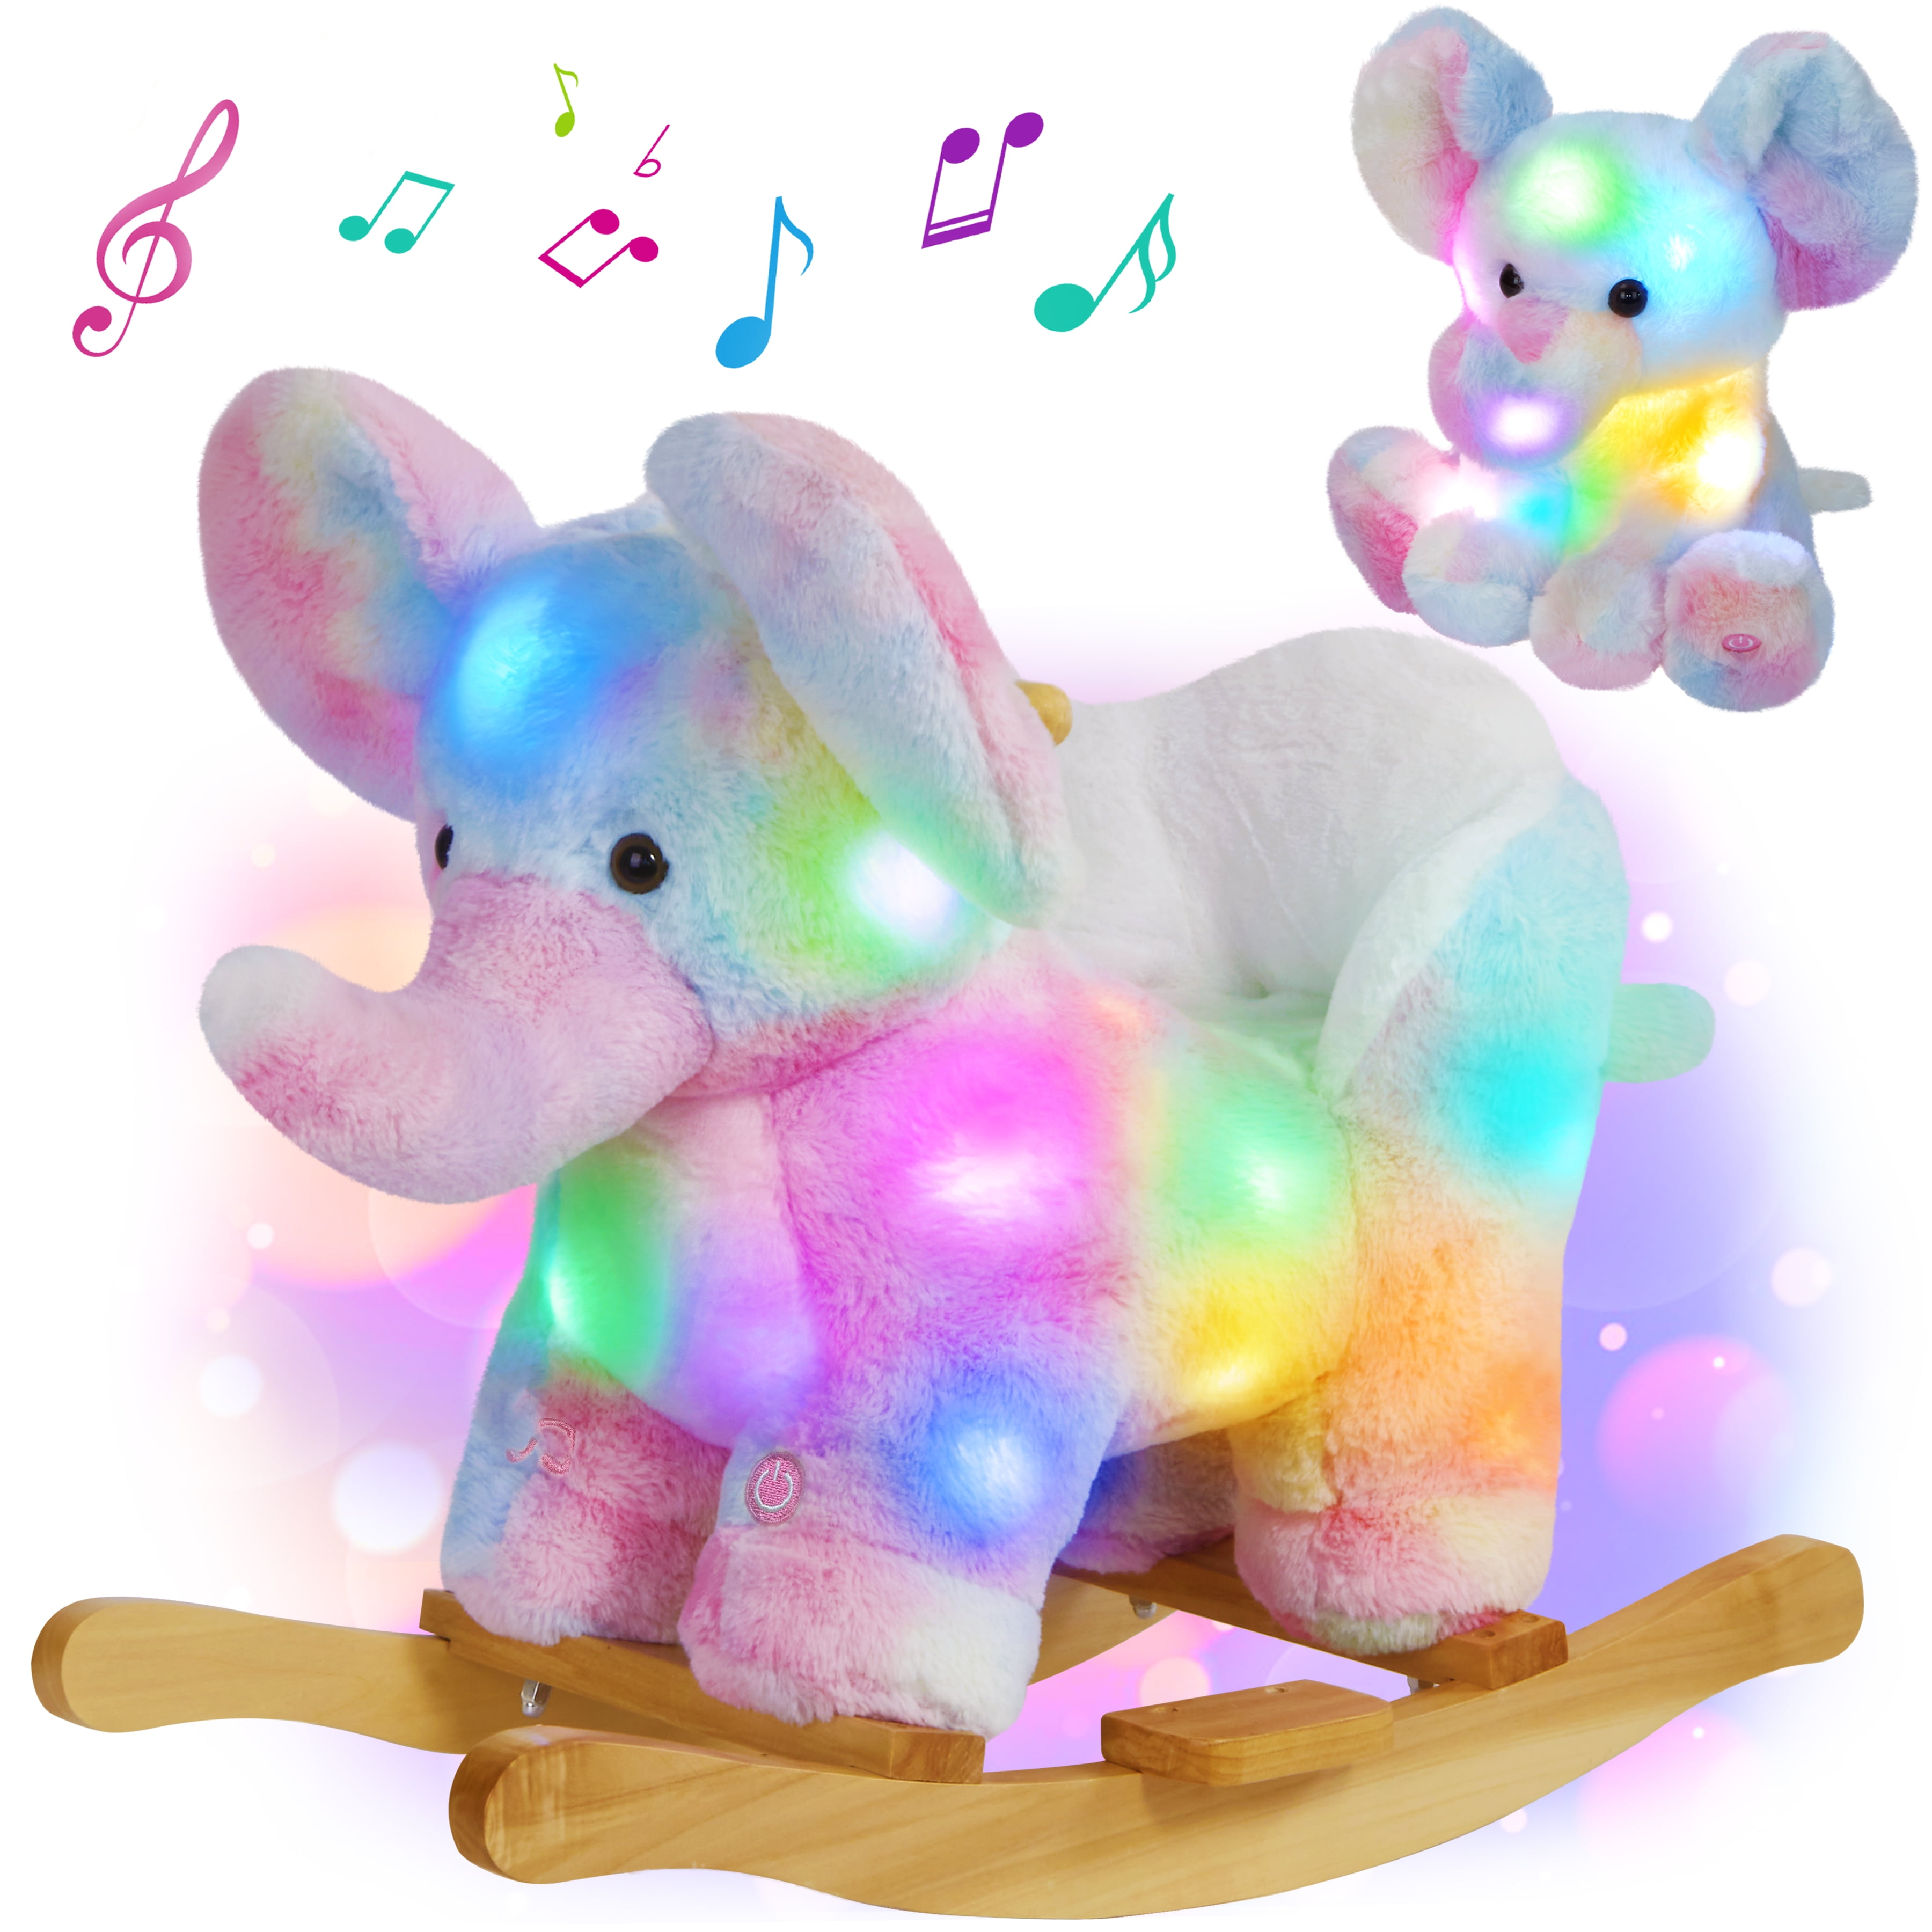 New Infant Soft Plush and Solid Wood Rocking Chair Elephant with Sound 